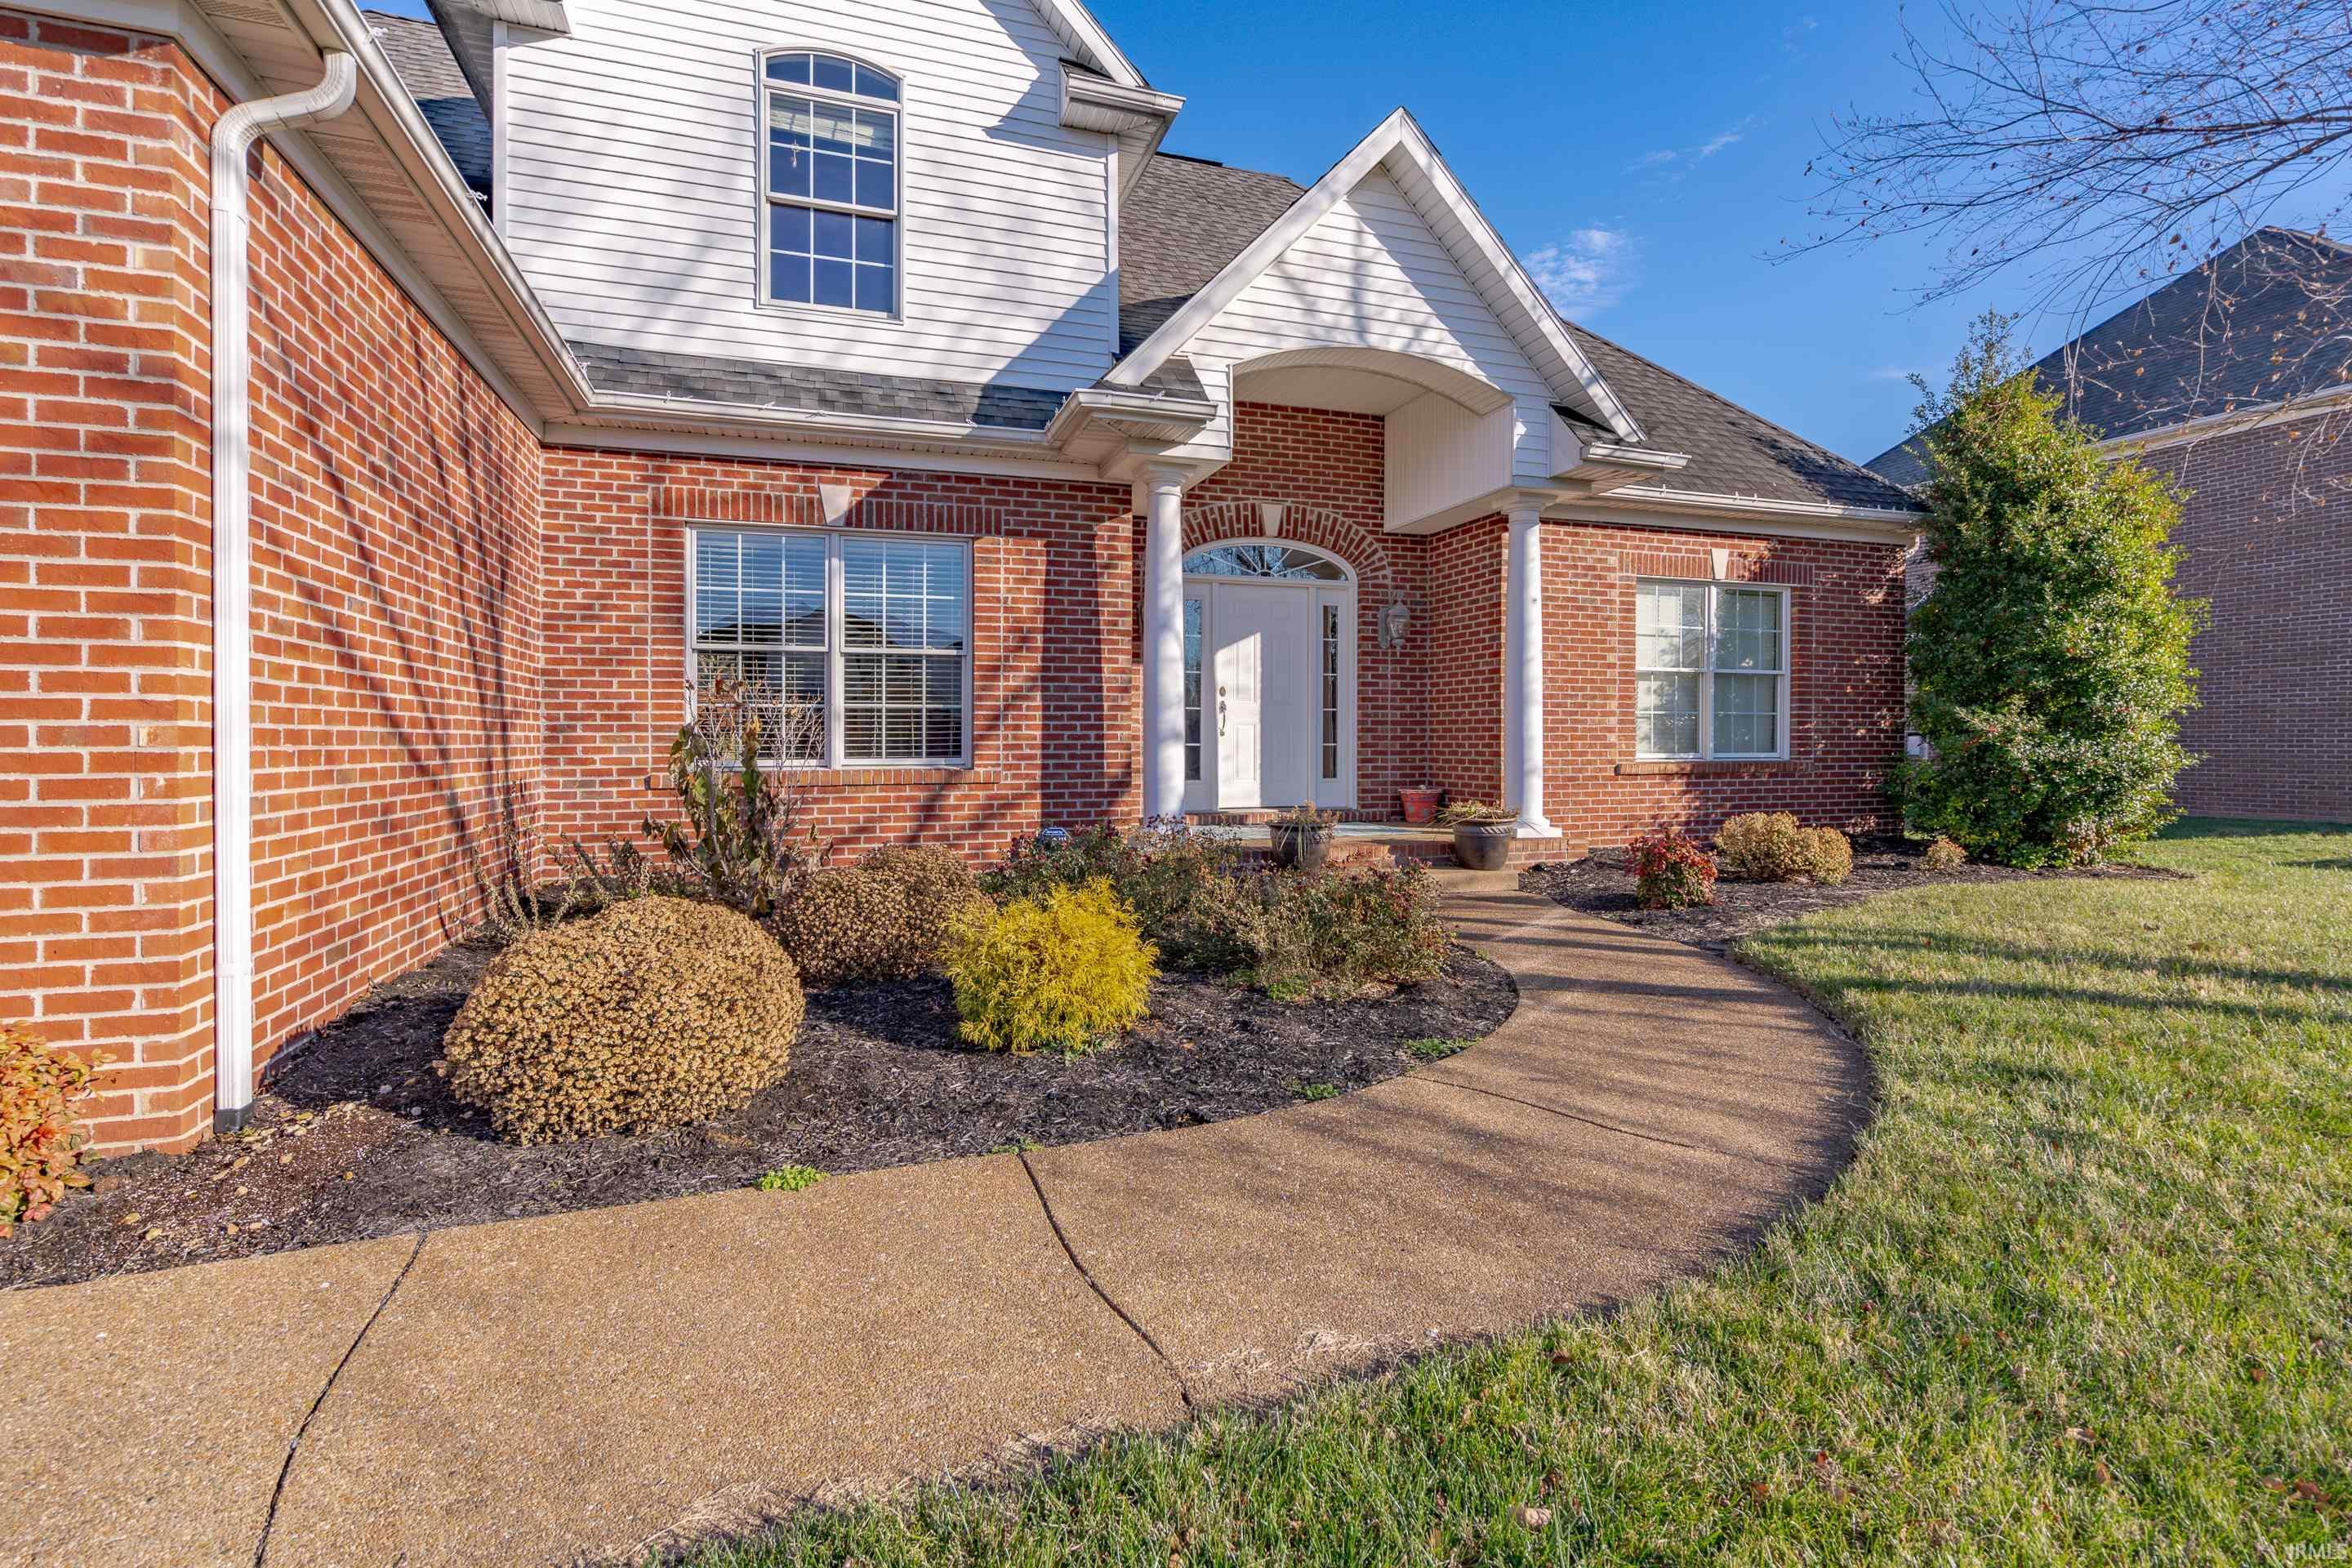 Great curb appeal with nice landscaping.